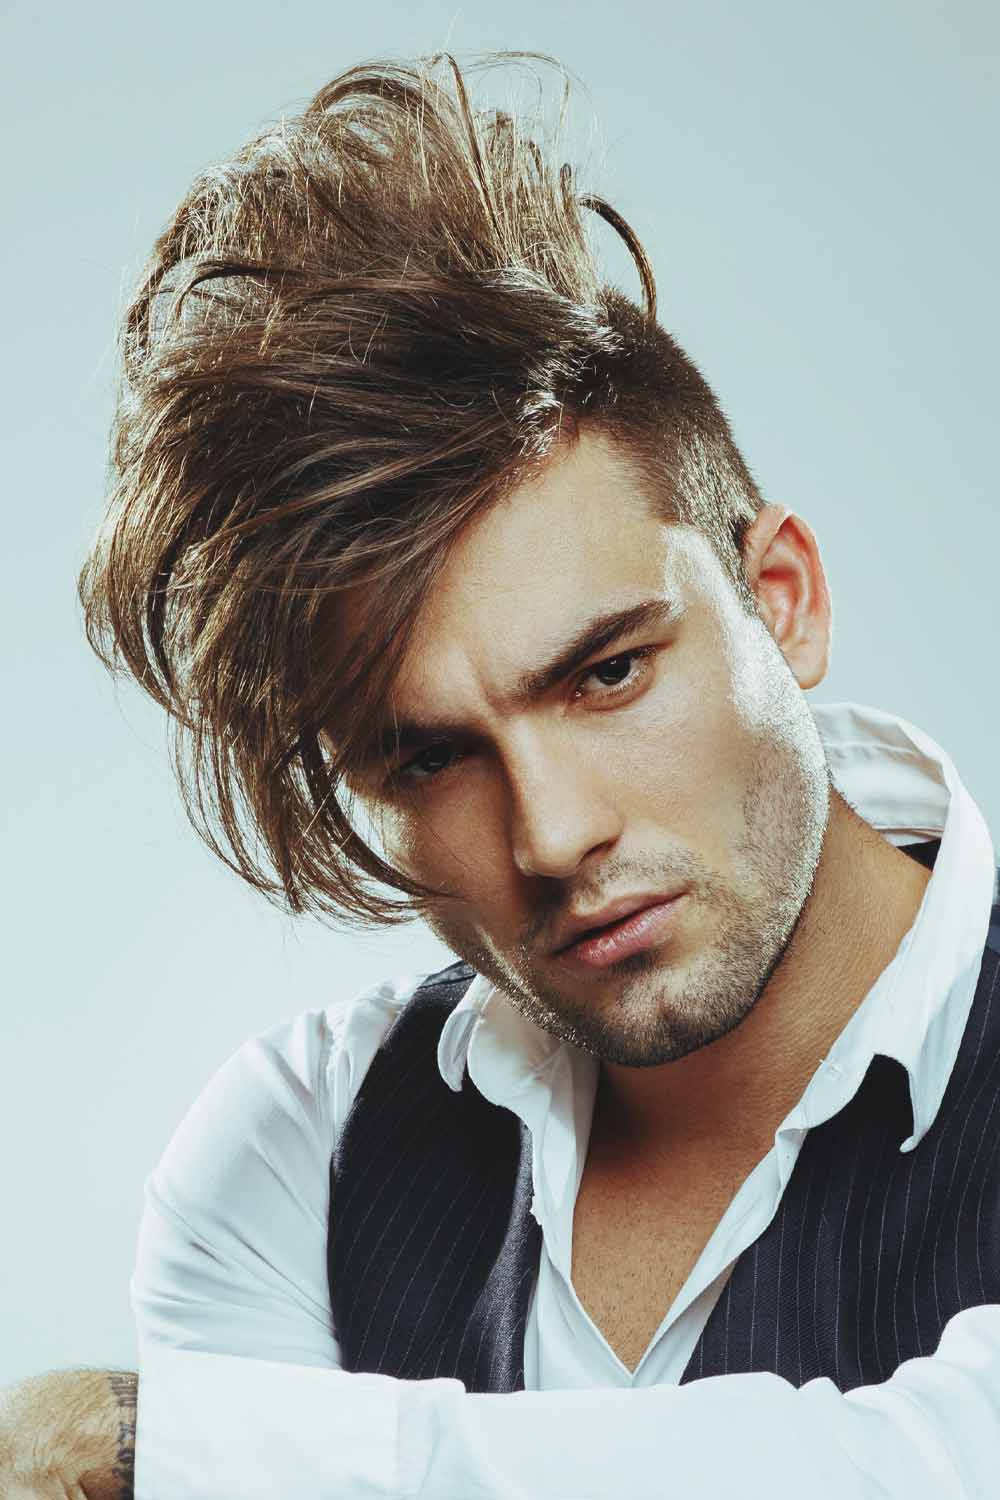 80 Inspiring Men's Medium Hairstyles You Should Try in 2023